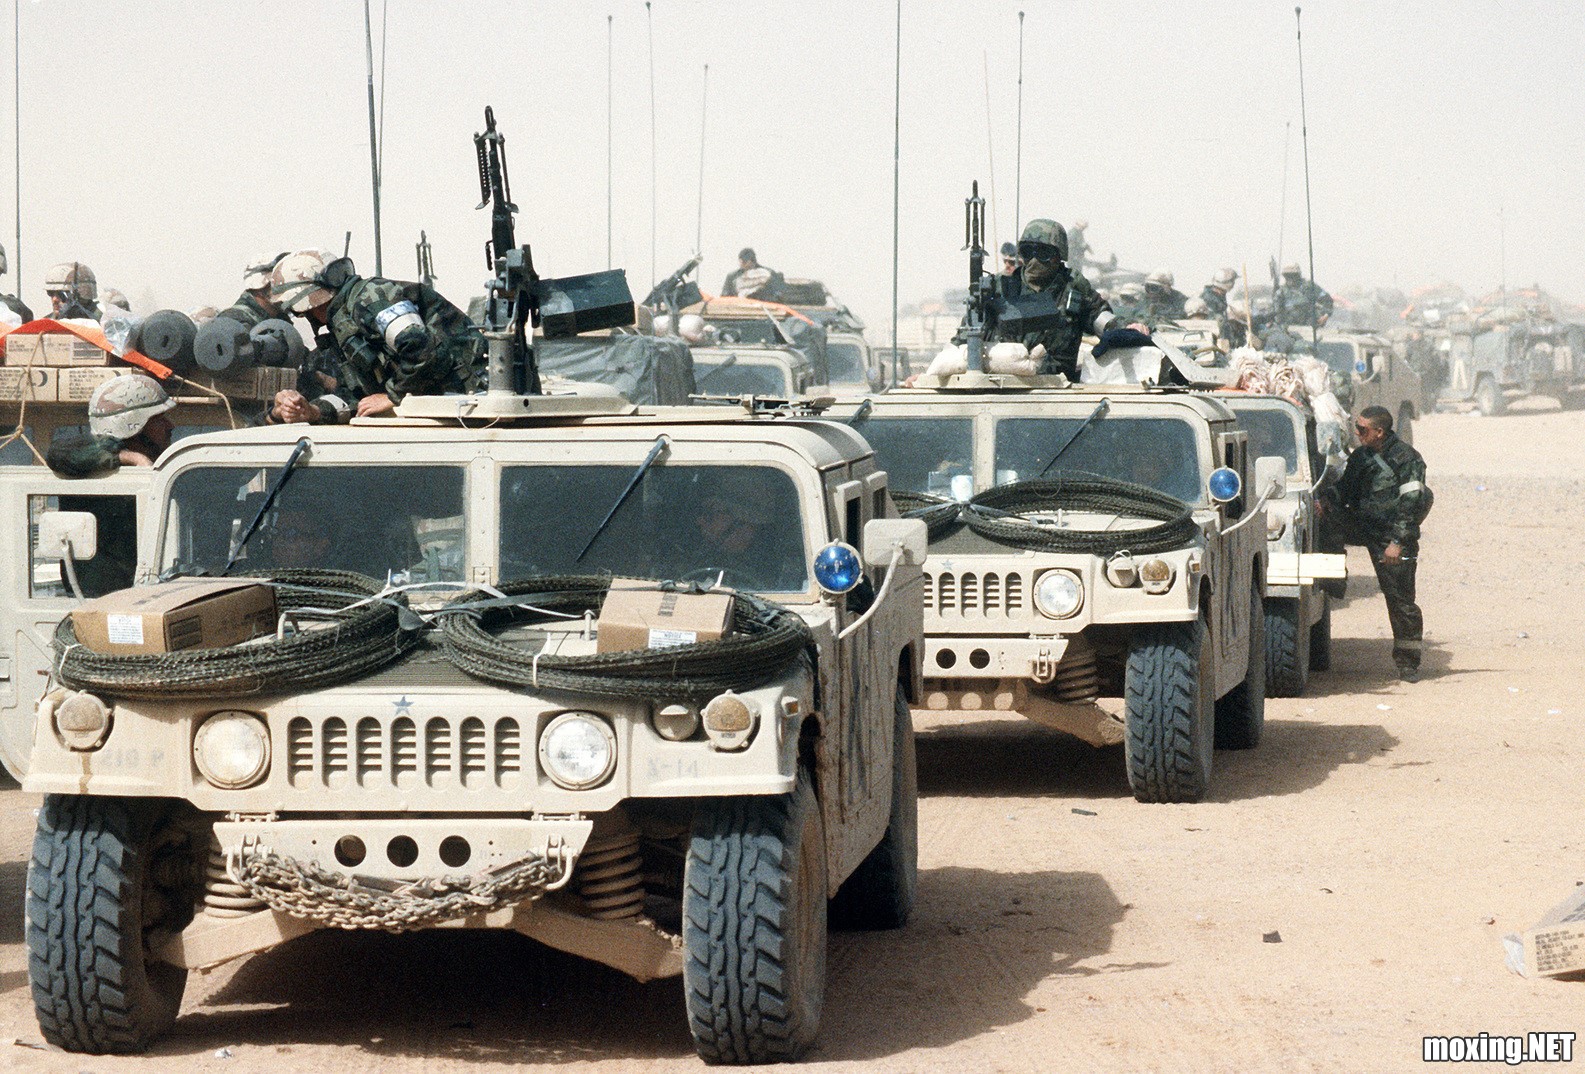 m-998-high-mobility-multipurpose-wheeled-vehicles-of-the-1st-brigade-101st-0122f2-1600.jpg